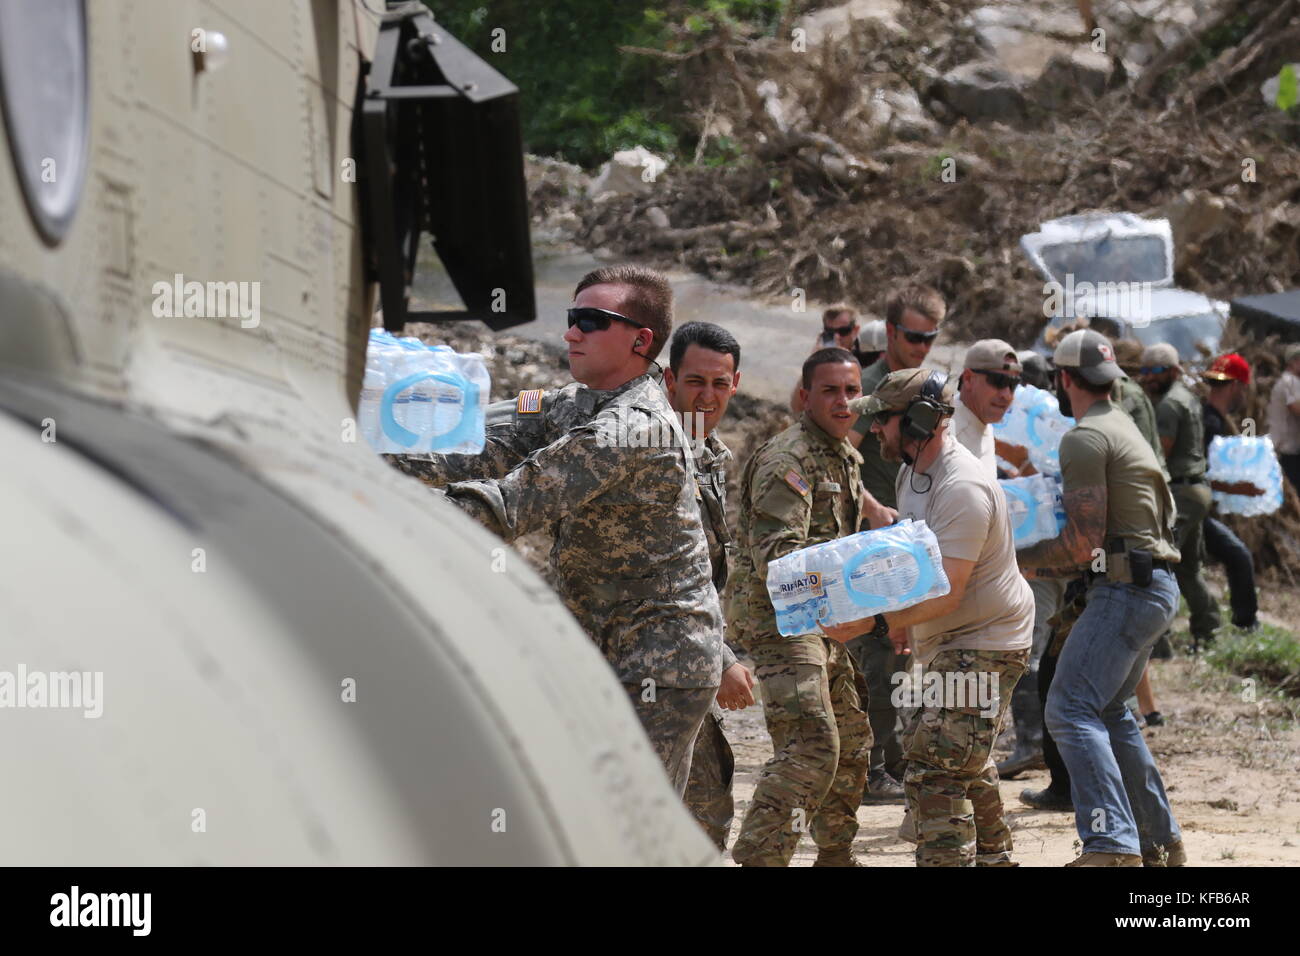 U.S. Army soldiers unload emergency supplies from a CH-47 Chinook helicopter during relief efforts in the aftermath of Hurricane Maria October 18, 2017 in Utuado, Puerto Rico.   (photo by Tyson Friar via Planetpix) Stock Photo